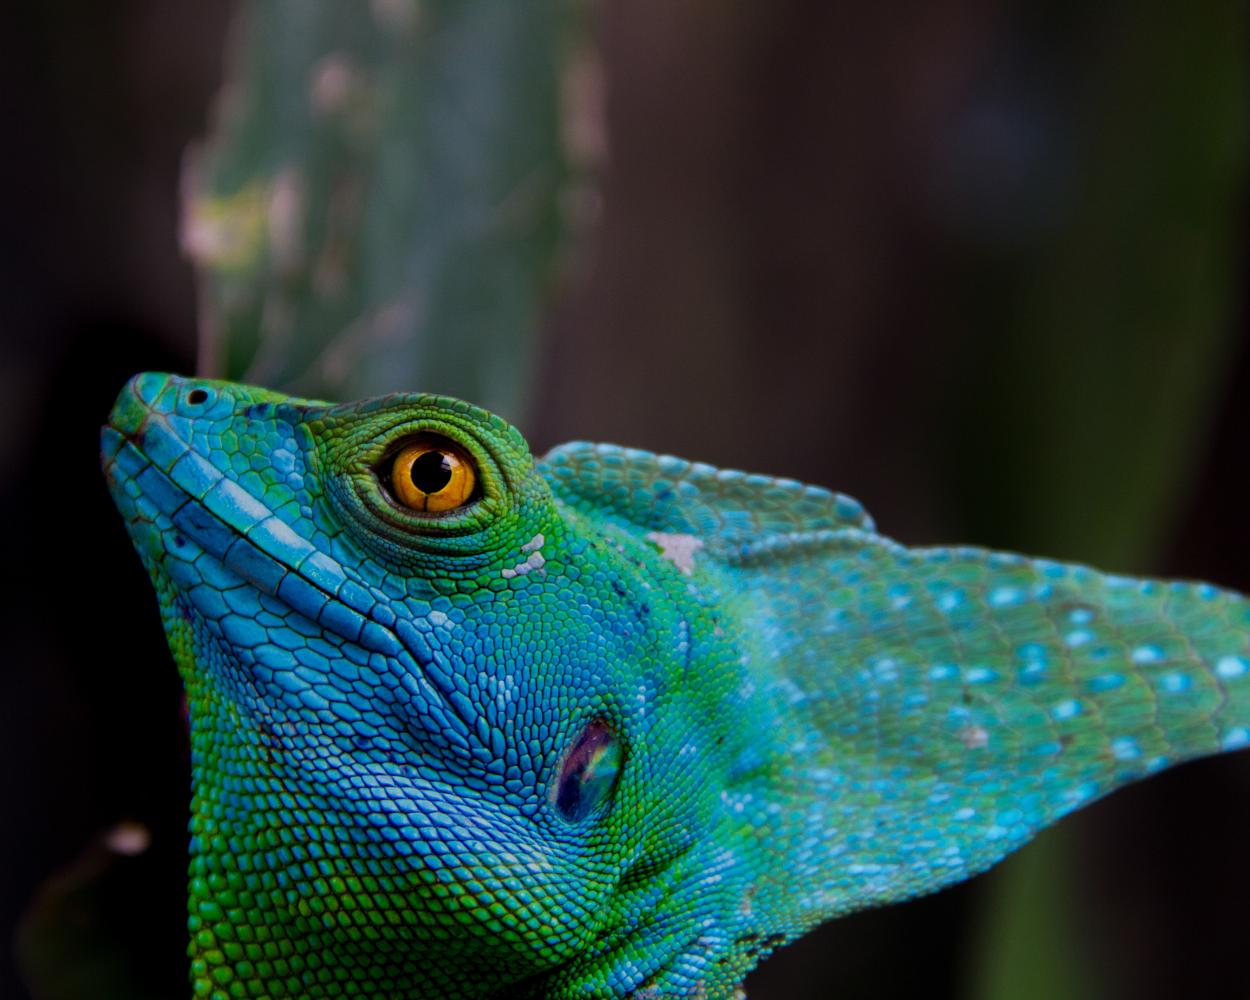 The Costa Rican Basilisk turns his head towards the light. These animals are known for their ability to run across water.